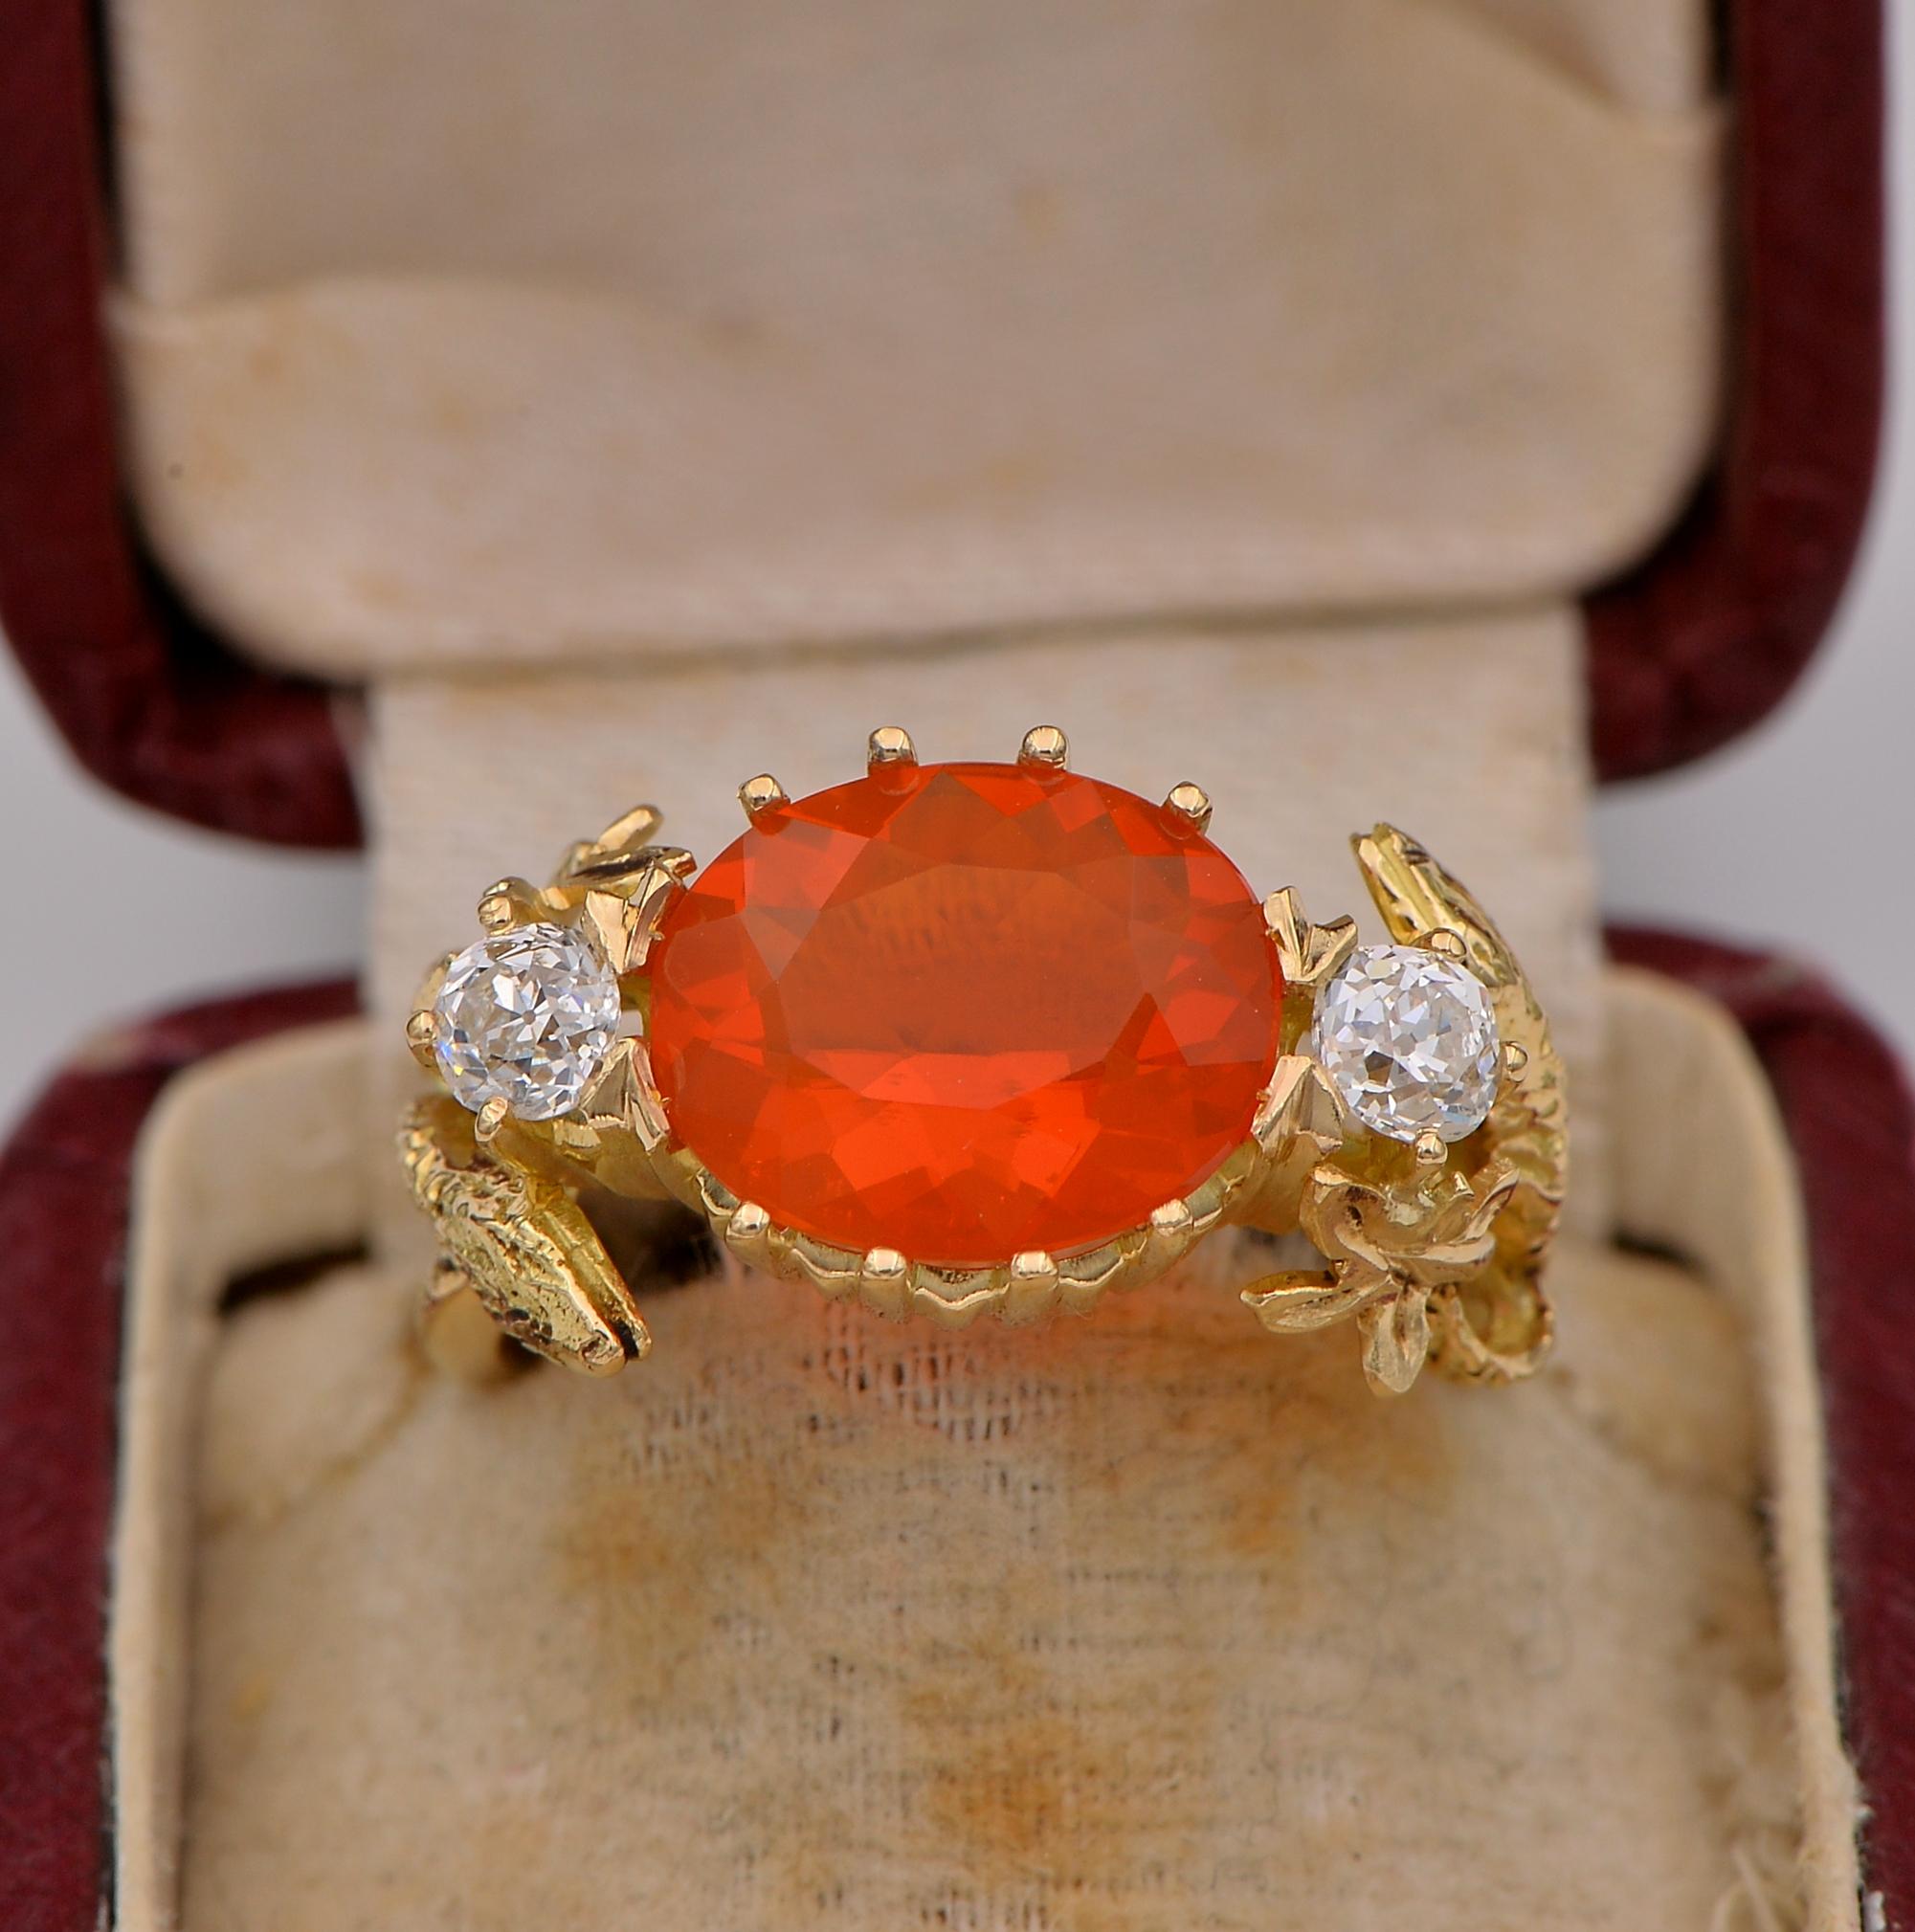 Rare & beautiful
Unusual and rare, antique late Victorian period, Fire Opal and Diamond Trilogy ring, 1900 or later
Hand crafted of solid 18 Kt gold as unique, fascinating design composed by side coiled snakes with carved skin, interspaced by leaf